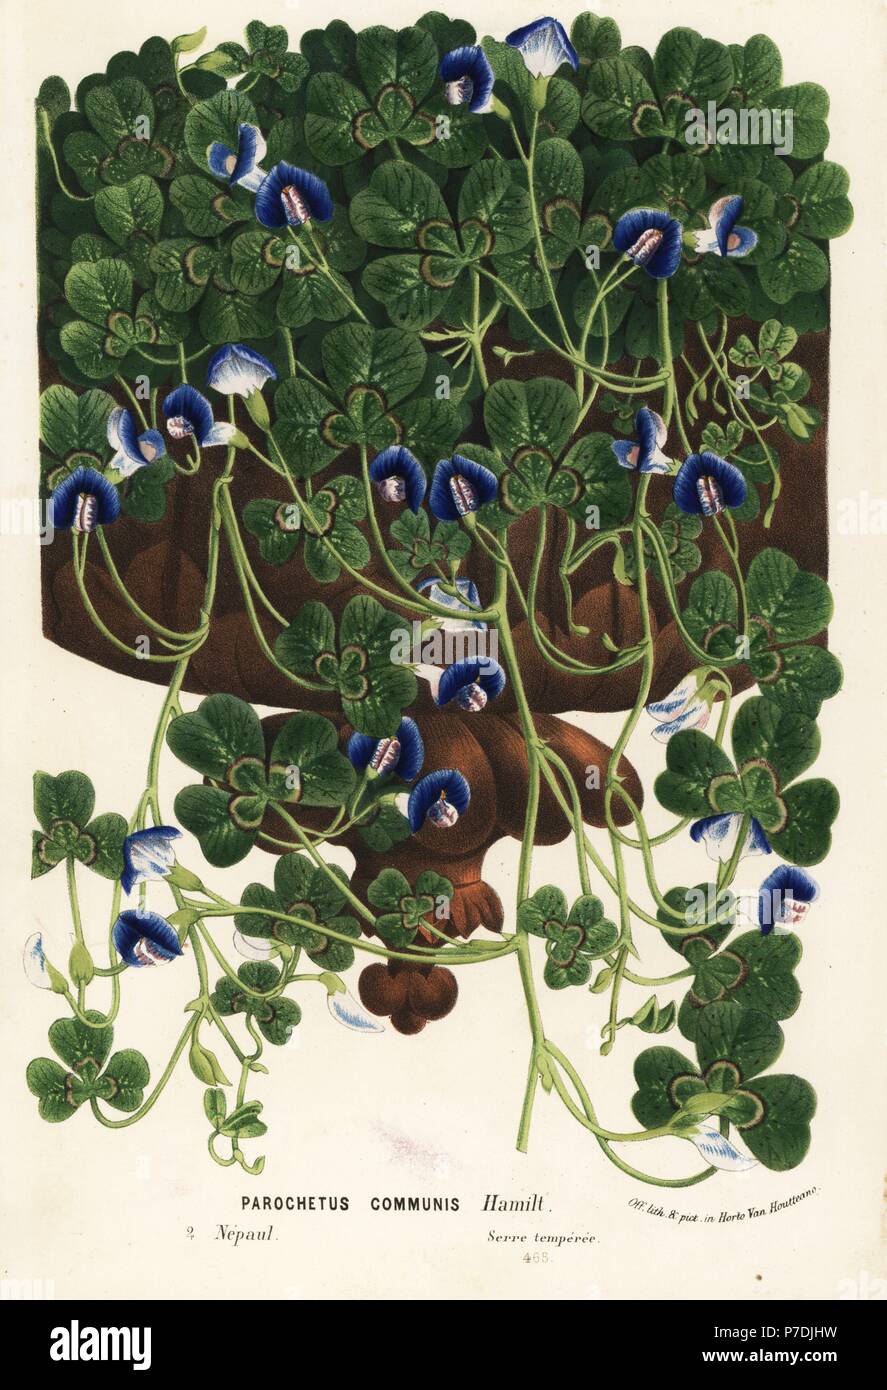 Shamrock pea or blue oxalis, Parochetus communis. Handcoloured lithograph from Louis van Houtte and Charles Lemaire's Flowers of the Gardens and Hothouses of Europe, Flore des Serres et des Jardins de l'Europe, Ghent, Belgium, 1862-65. Stock Photo